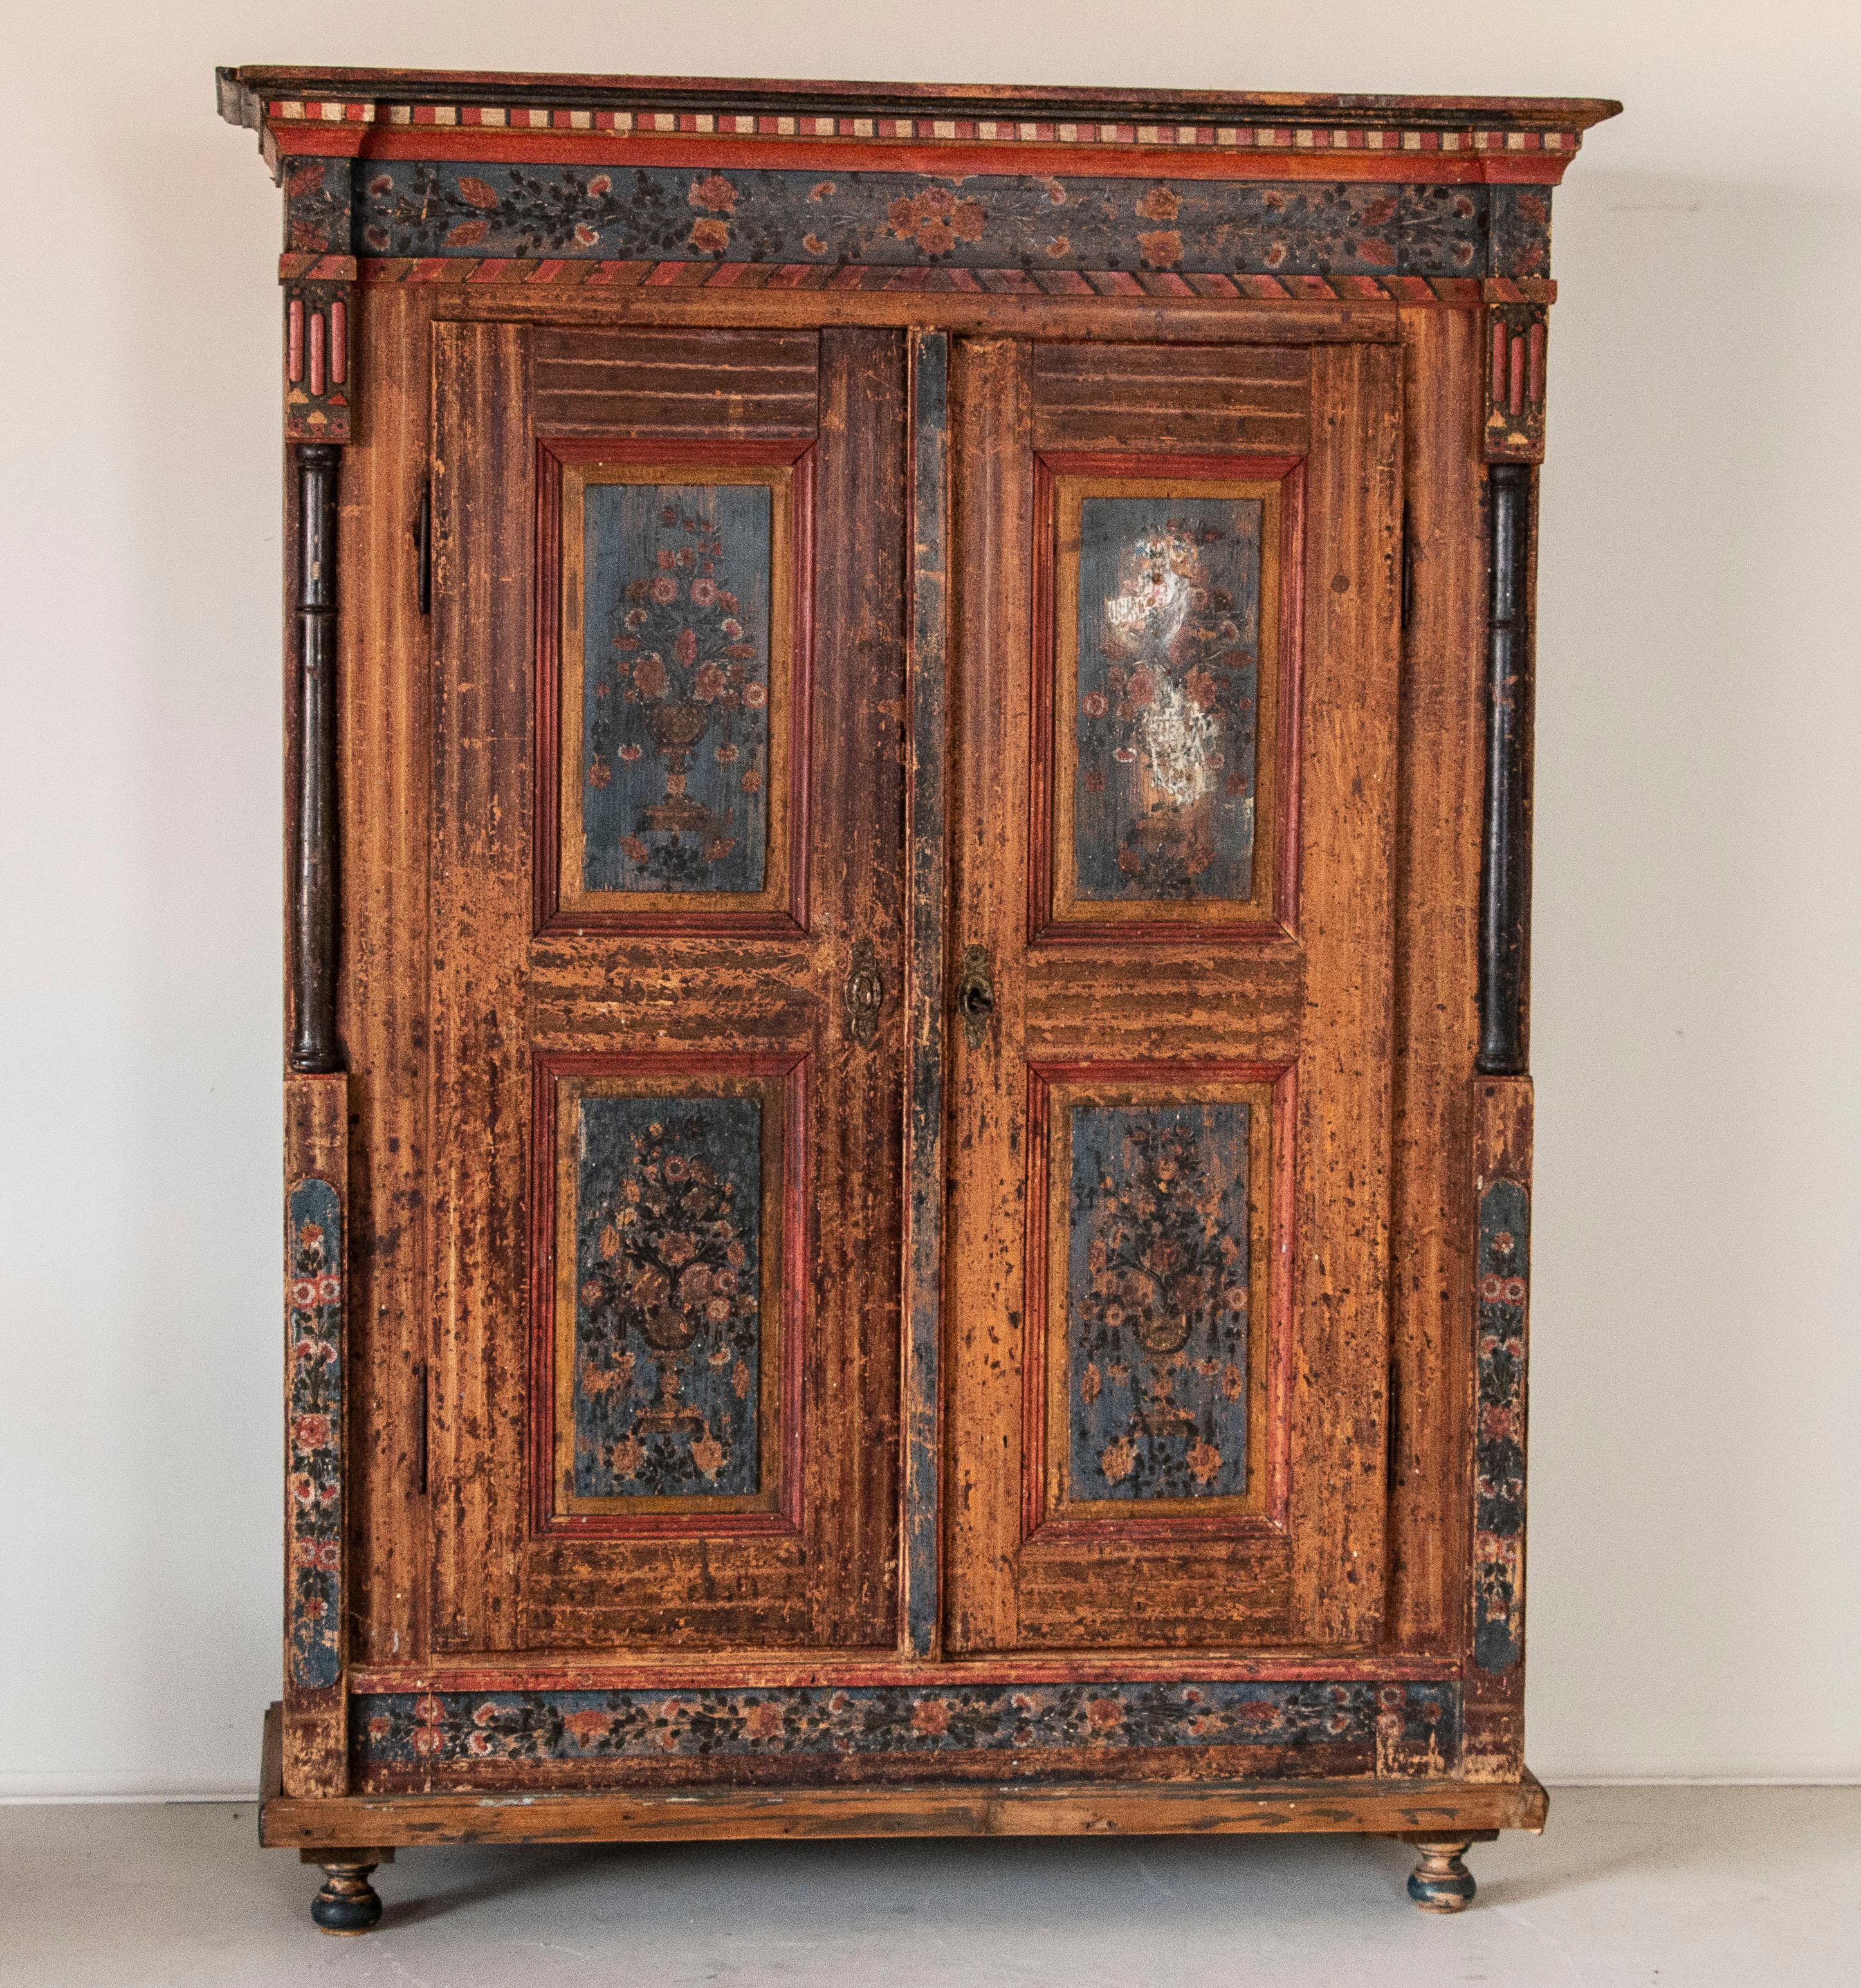 This delightful armoire was considered exceptional in its day, with the elaborate hand-painted details requiring a professional painter to invest a tremendous amount of time to complete. While it has grown worn and faded over time, it is precisely